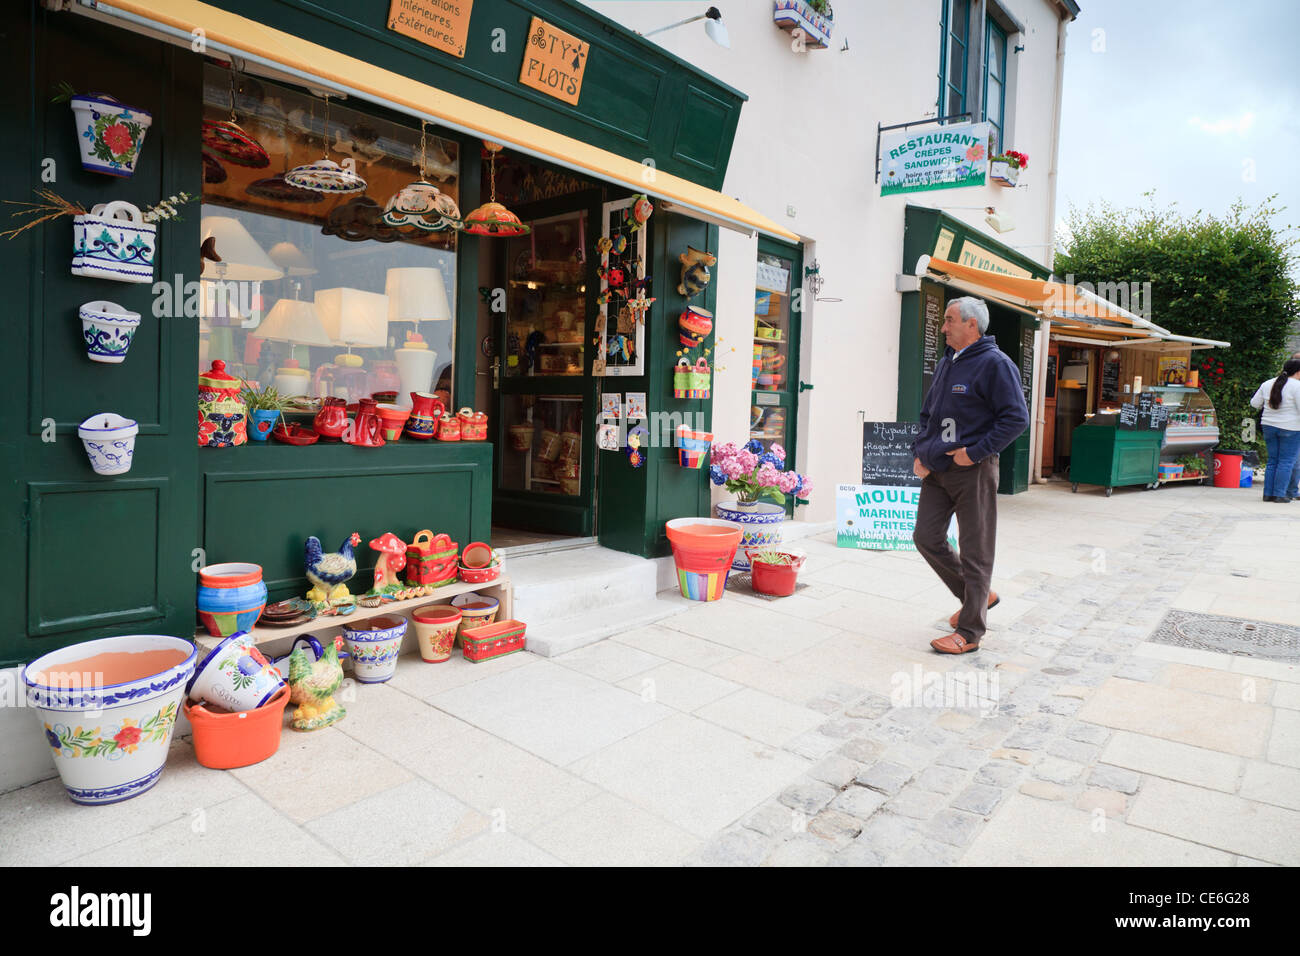 People strolling amongst the shops and restaurants in the Ville Close, the historic quarter of Cocarneau, Brittany, France. Stock Photo